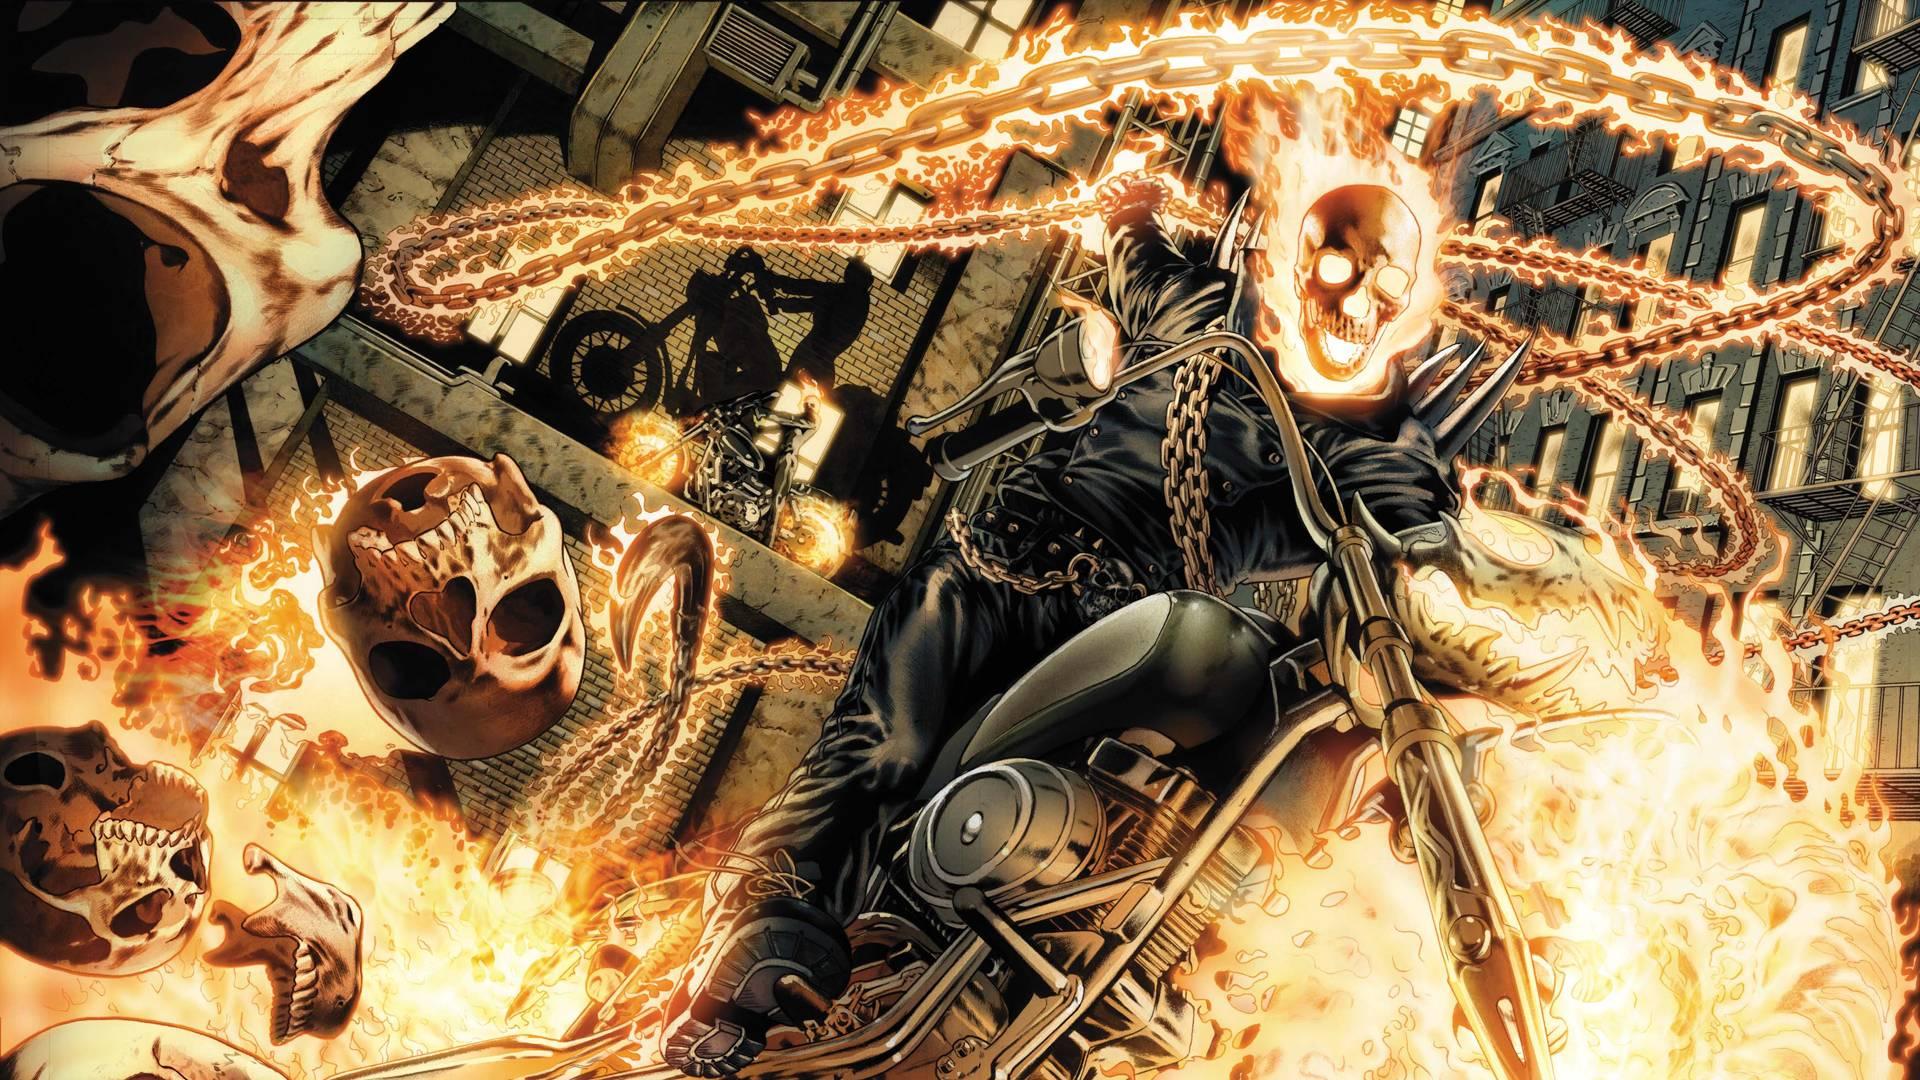 Ghost Rider 2 Wallpapers 1366×768 | HD Wallpapers Range